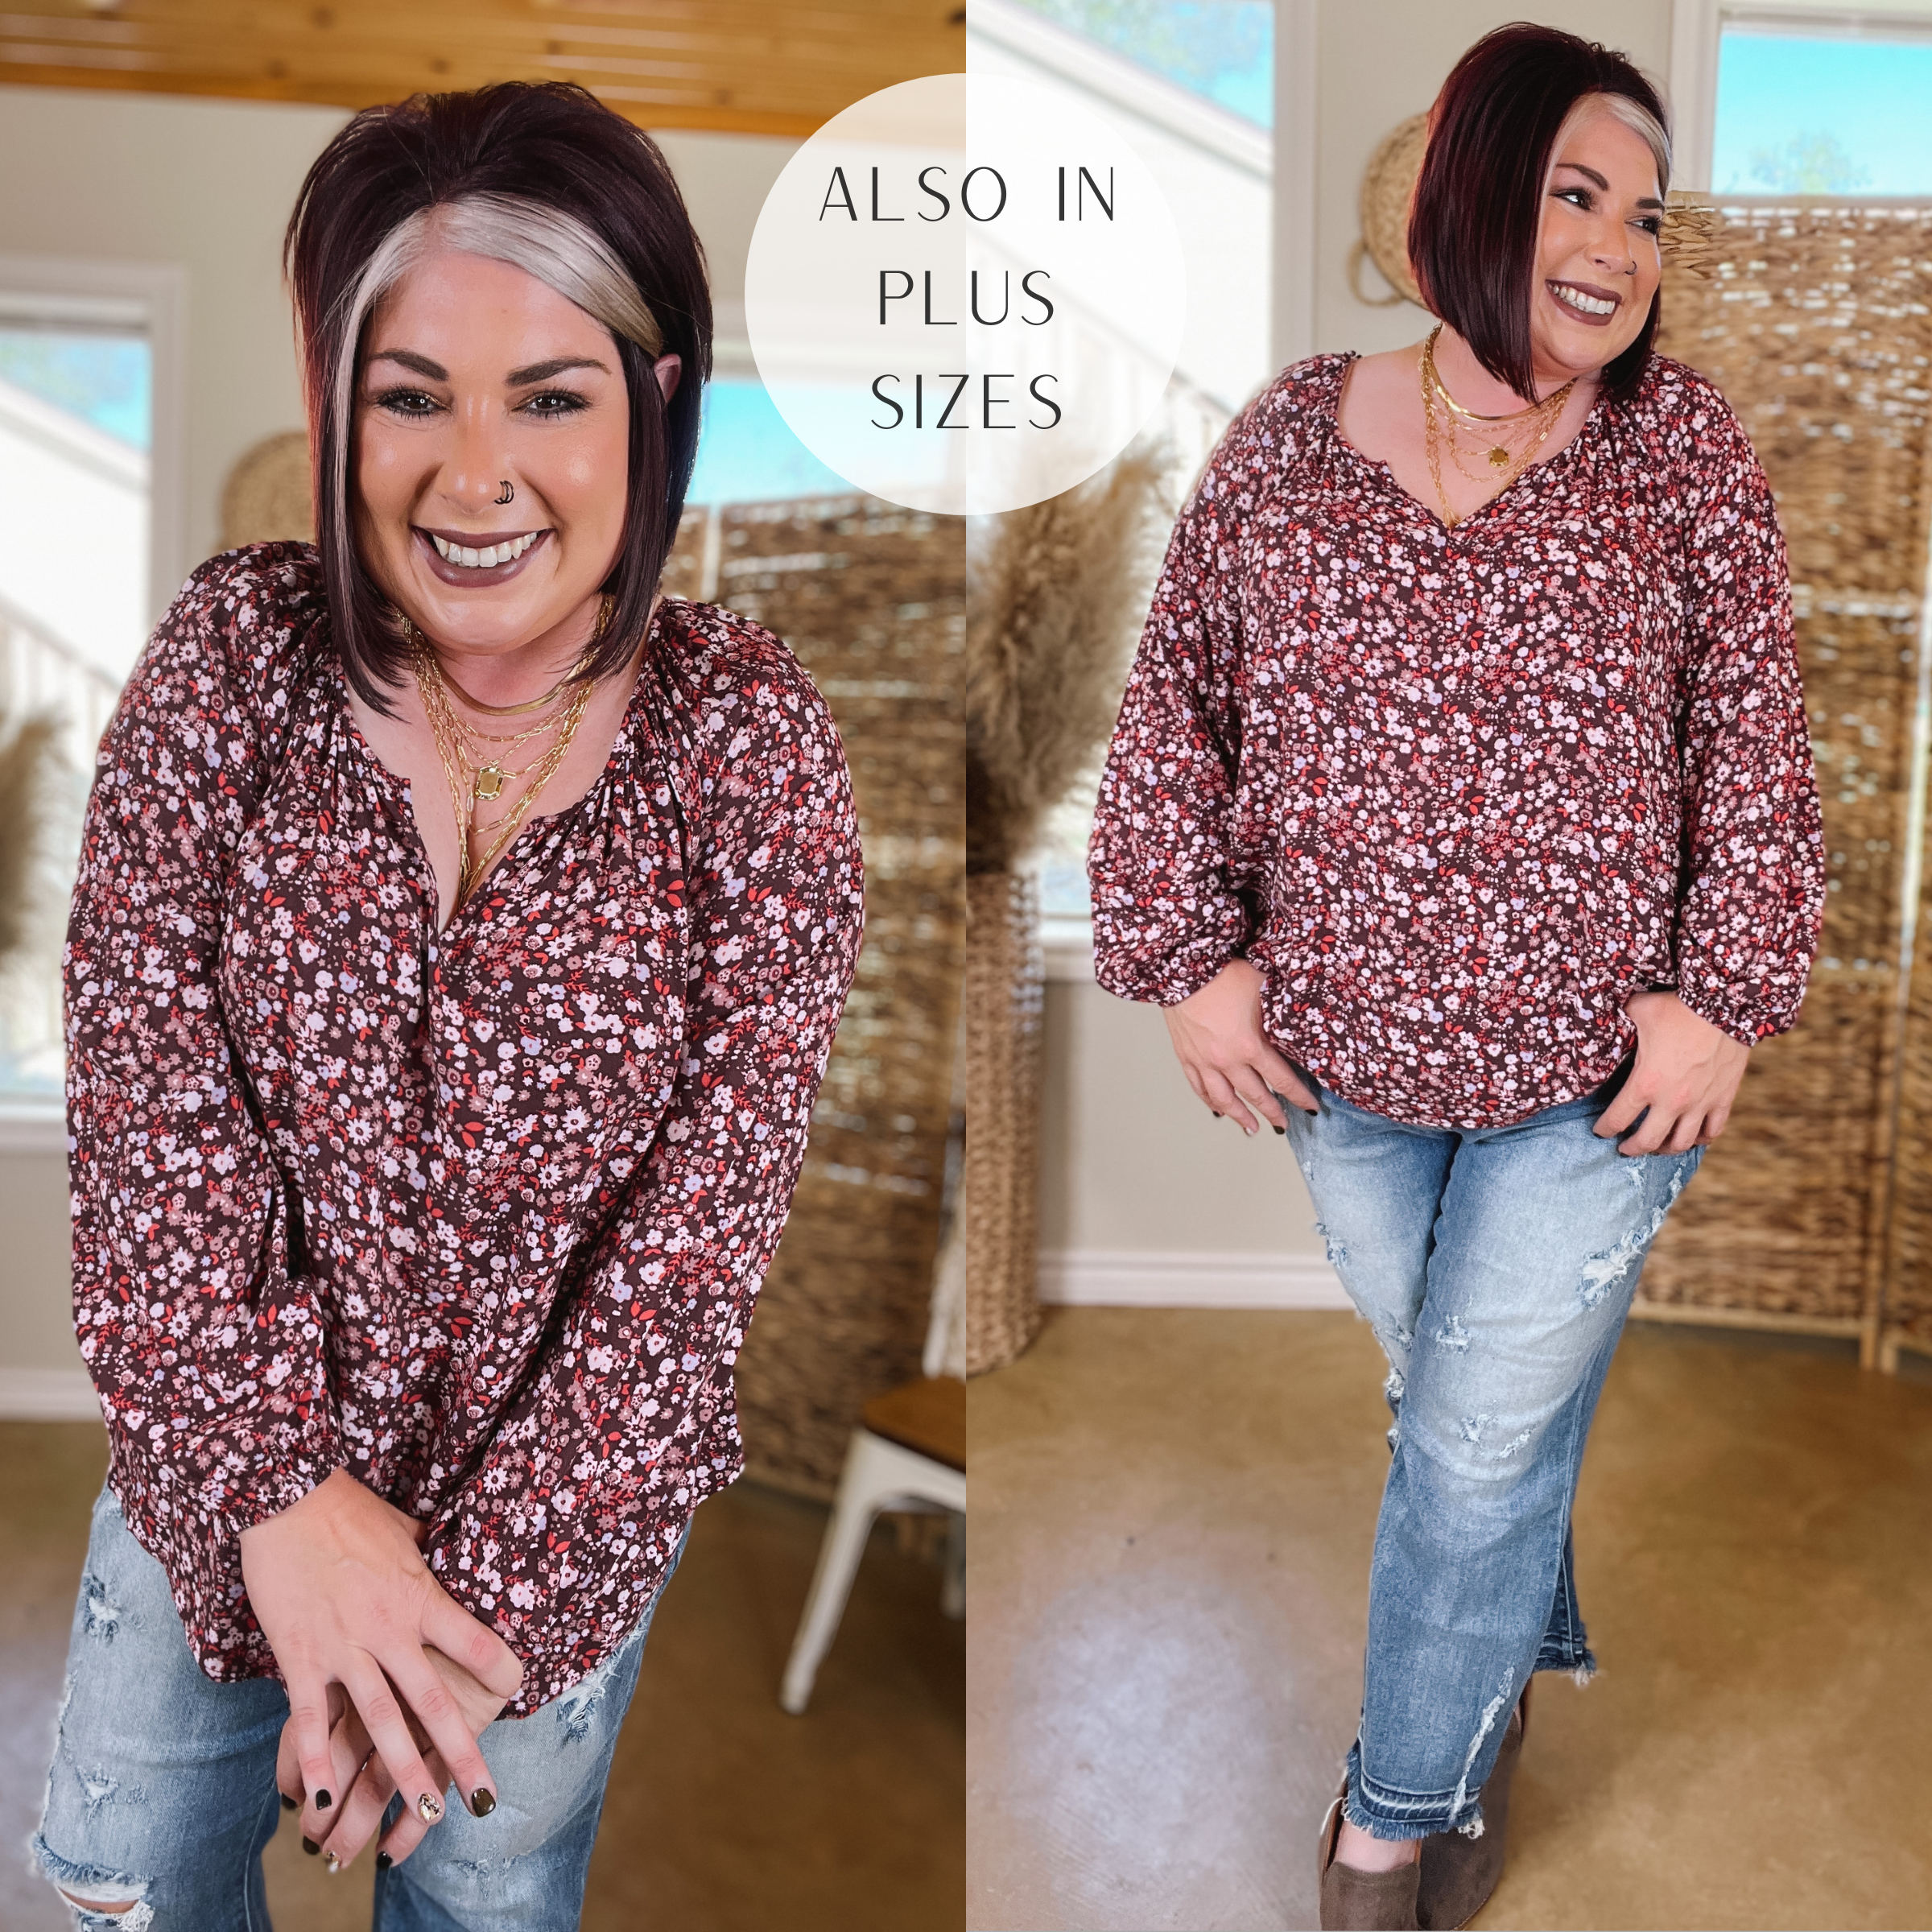 Model is wearing a maroon floral top with long sleeves and a notched neckline. Model has it paired with distressed boyfriend jeans, brown booties, and gold jewelry.